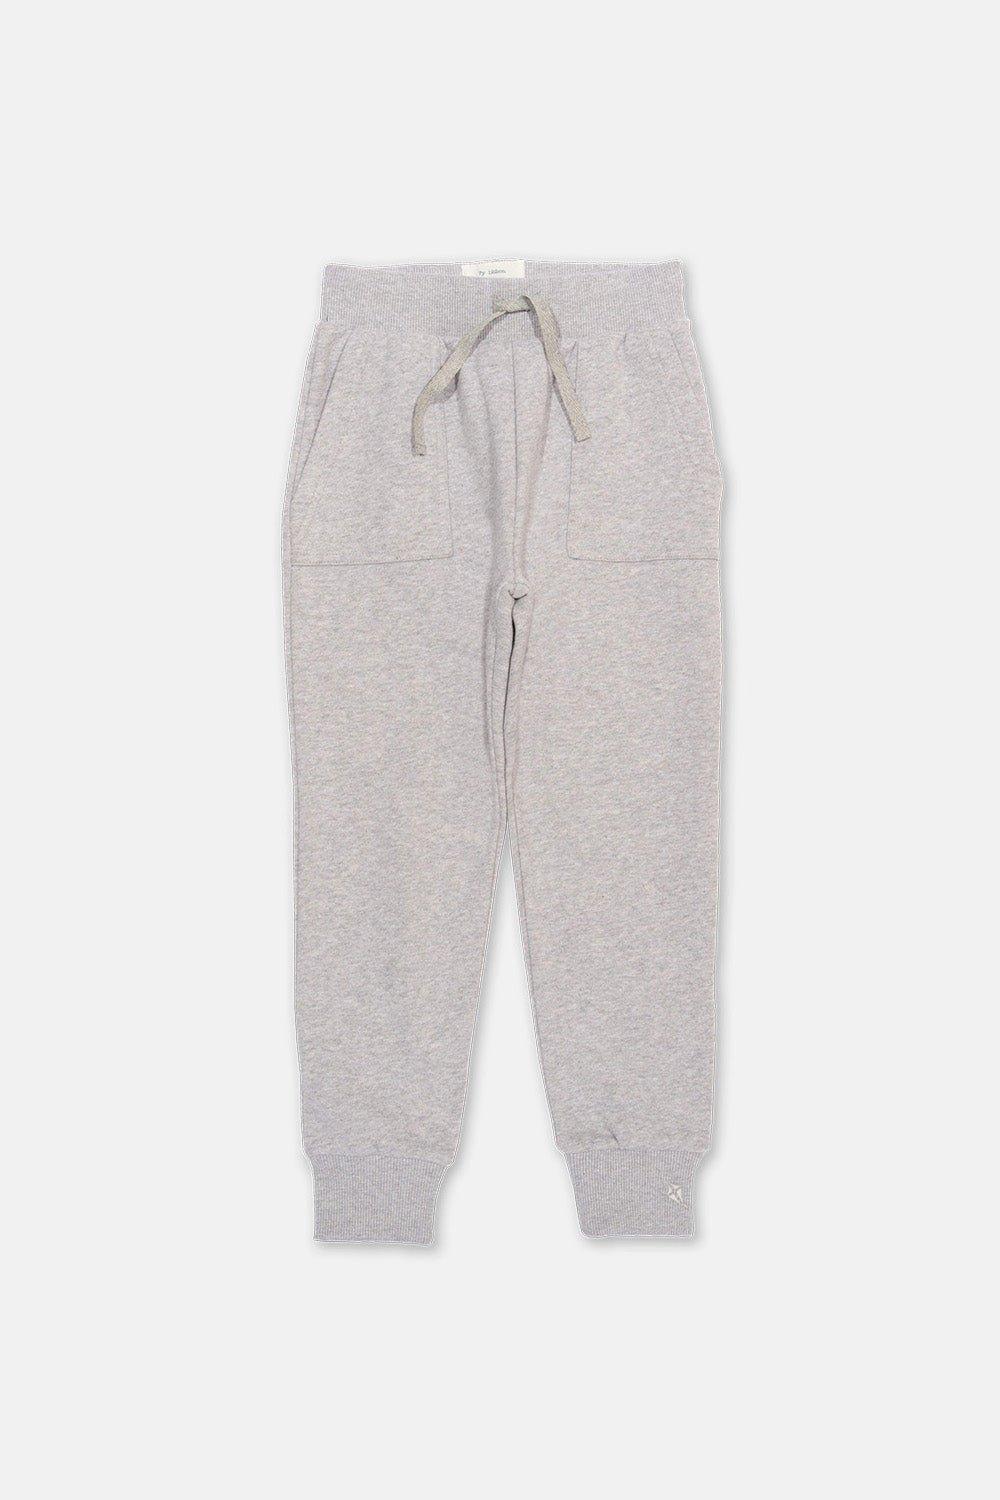 All Day Joggers Grey Marl